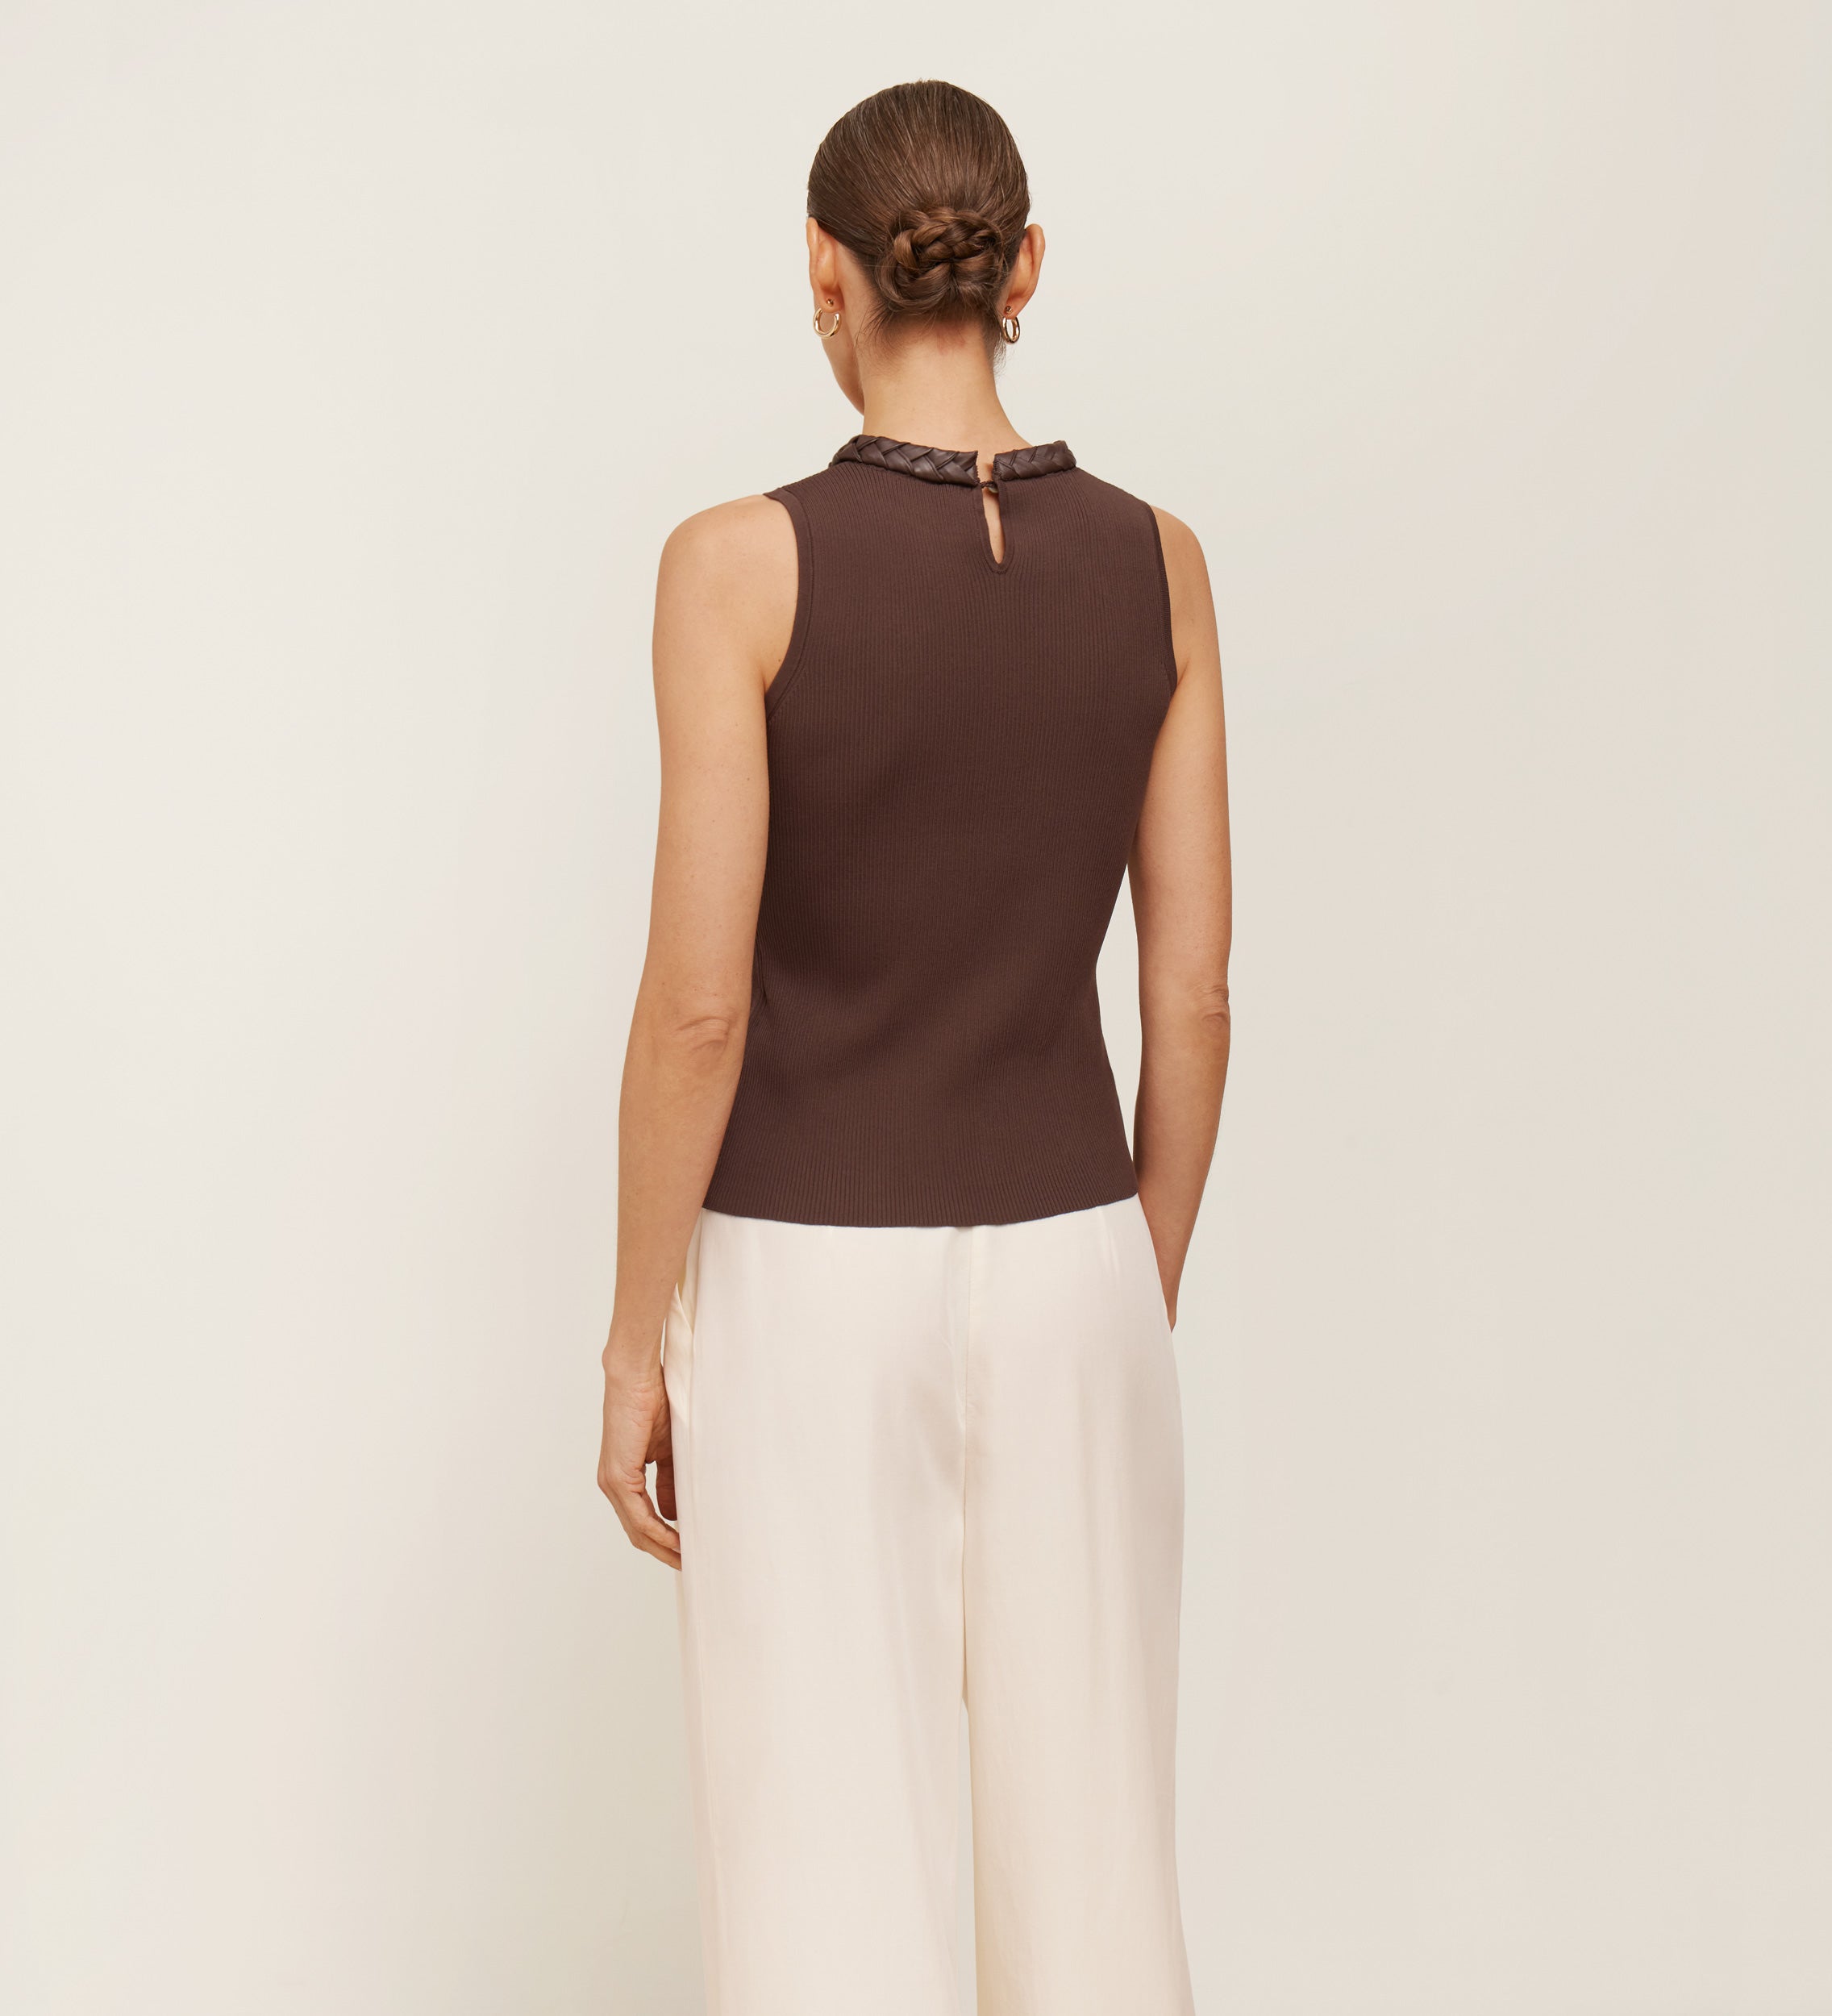 Eco-leather braid tricot top